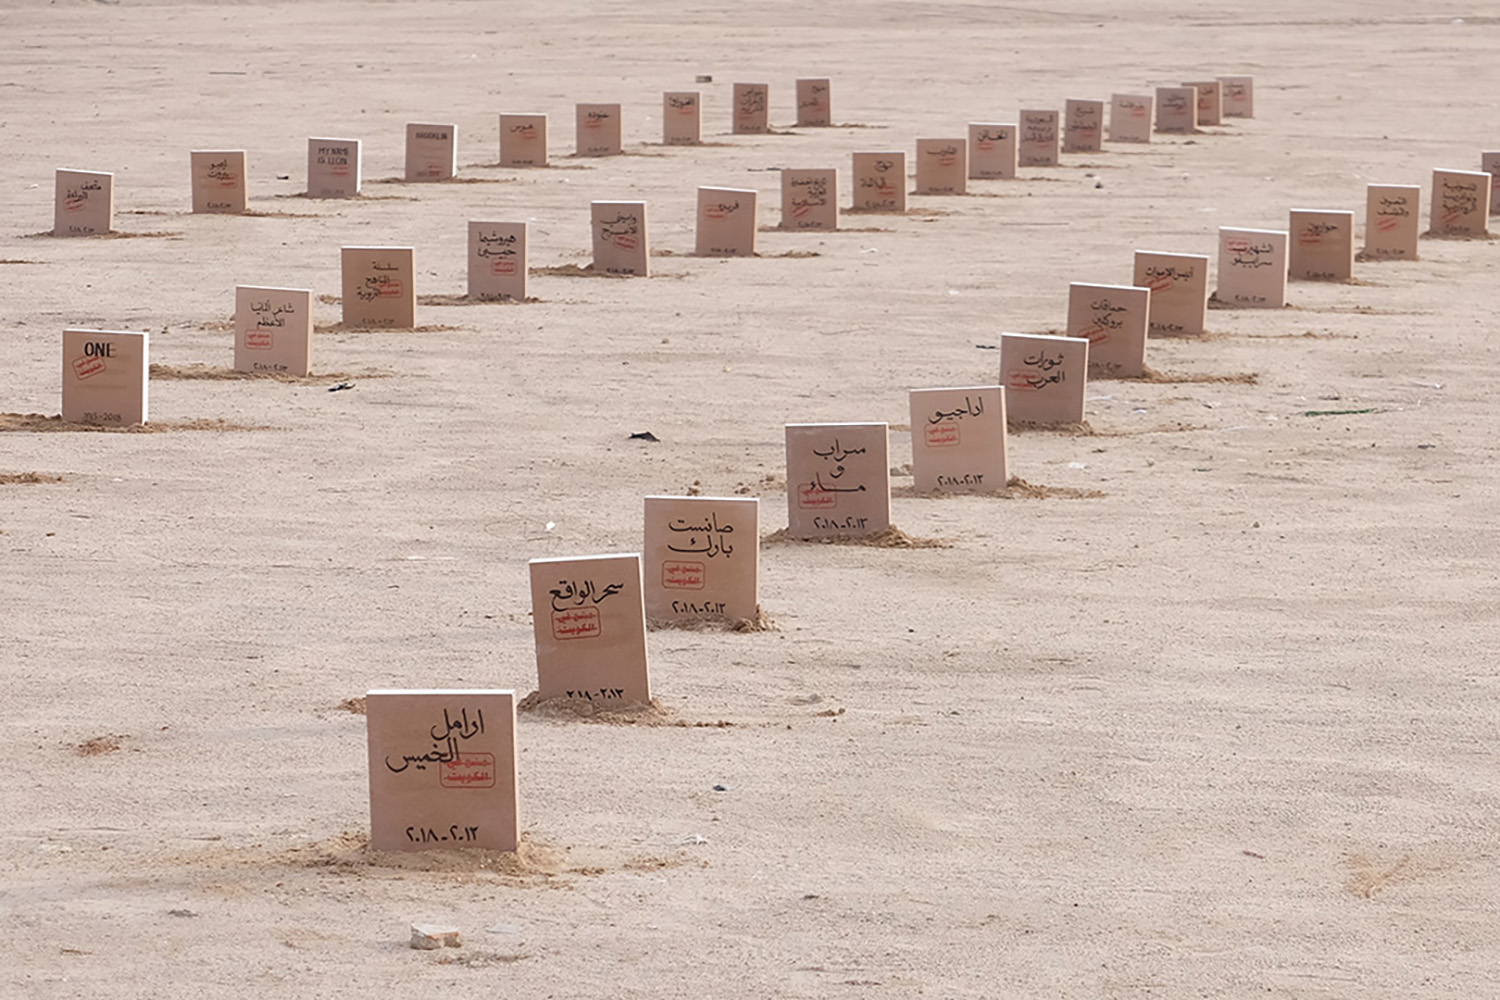 ToKuwaiti's Banned Book Graveyard project